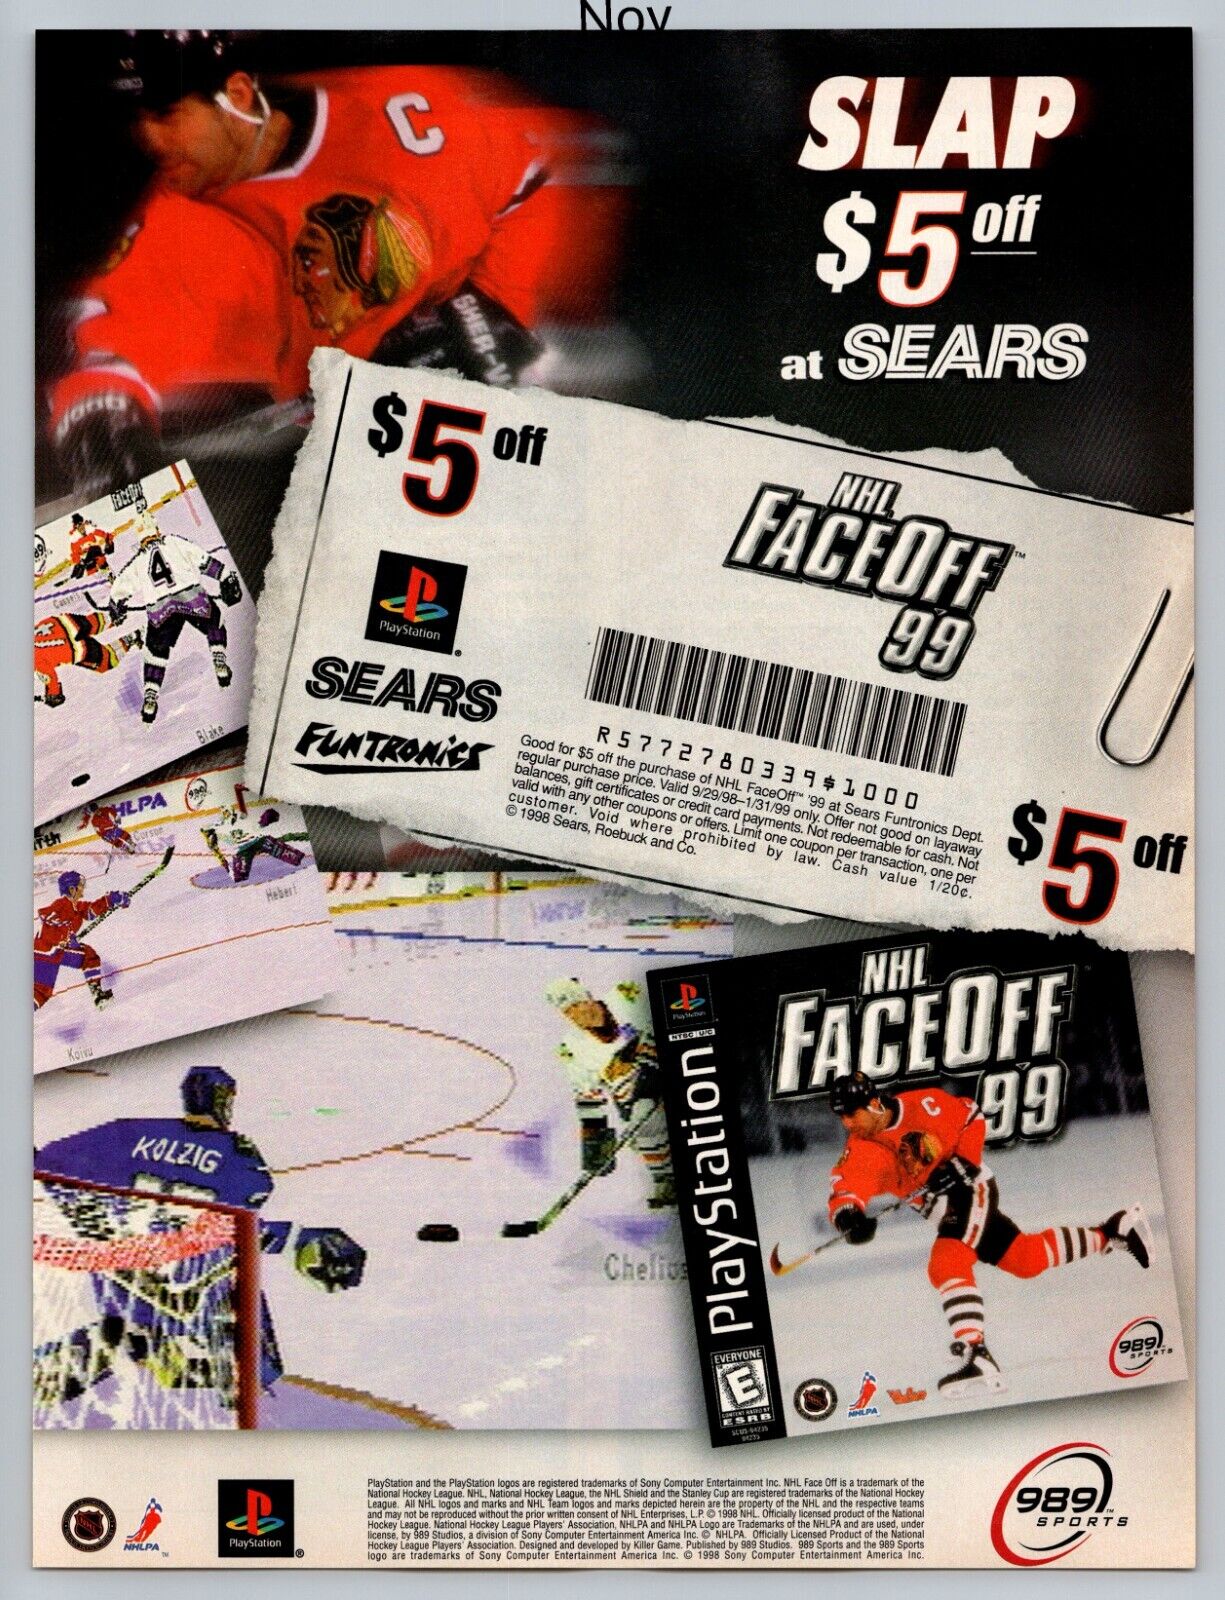 NHL Face Off 99 Playstation PS1 Game Promo 1998 Full Page Print Ad